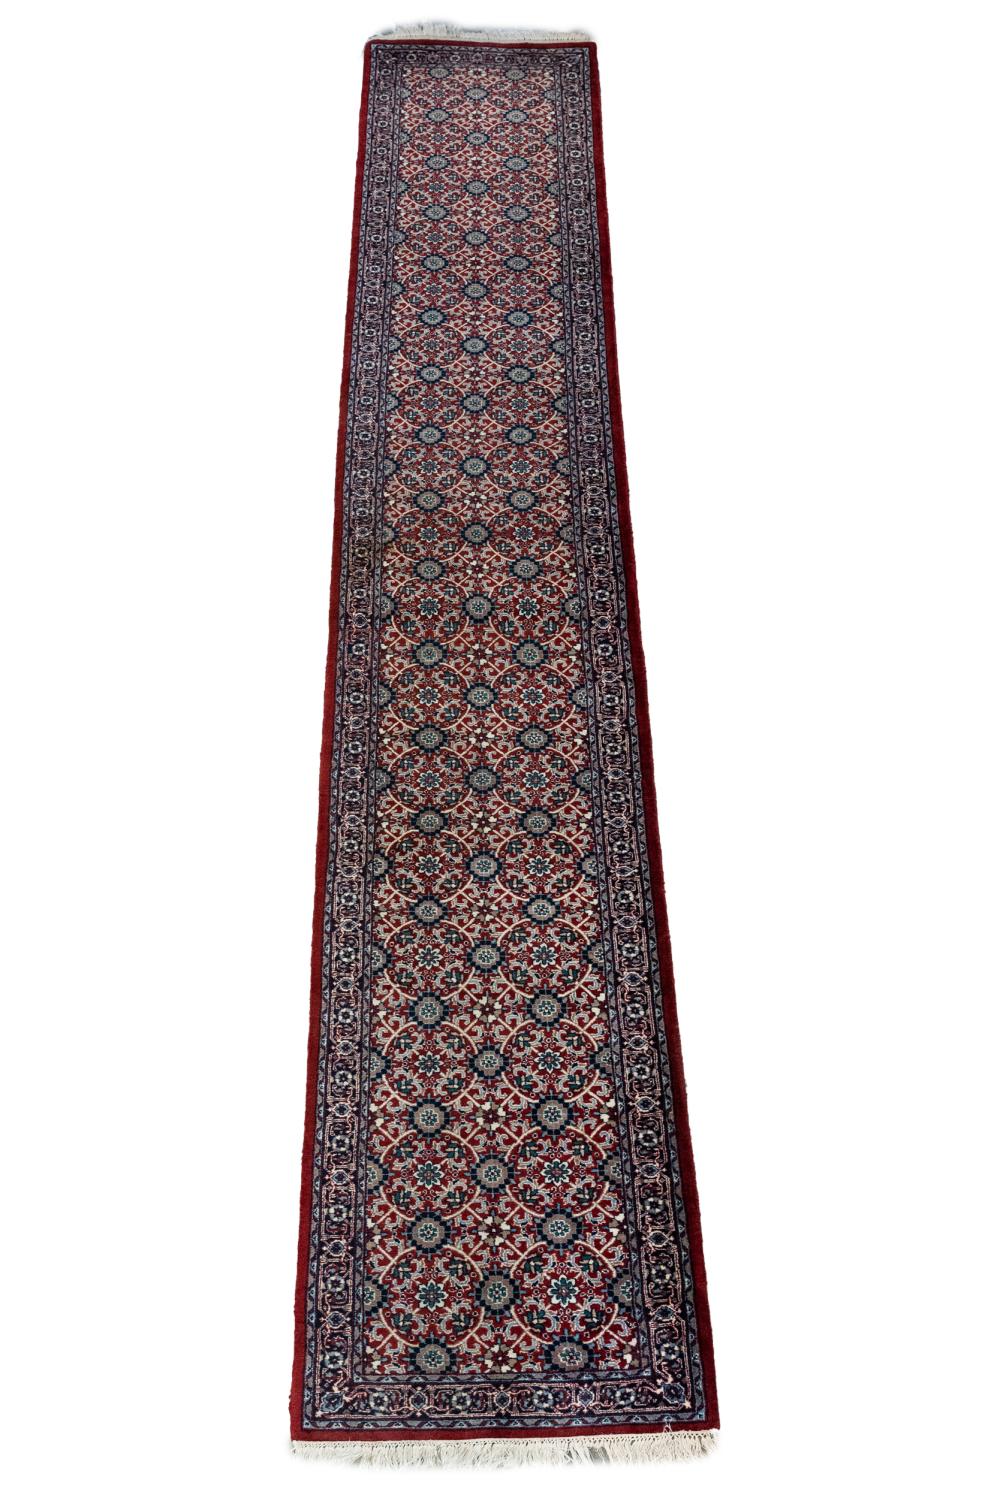 PERSIAN RUNNERwith floral red and 3329f7